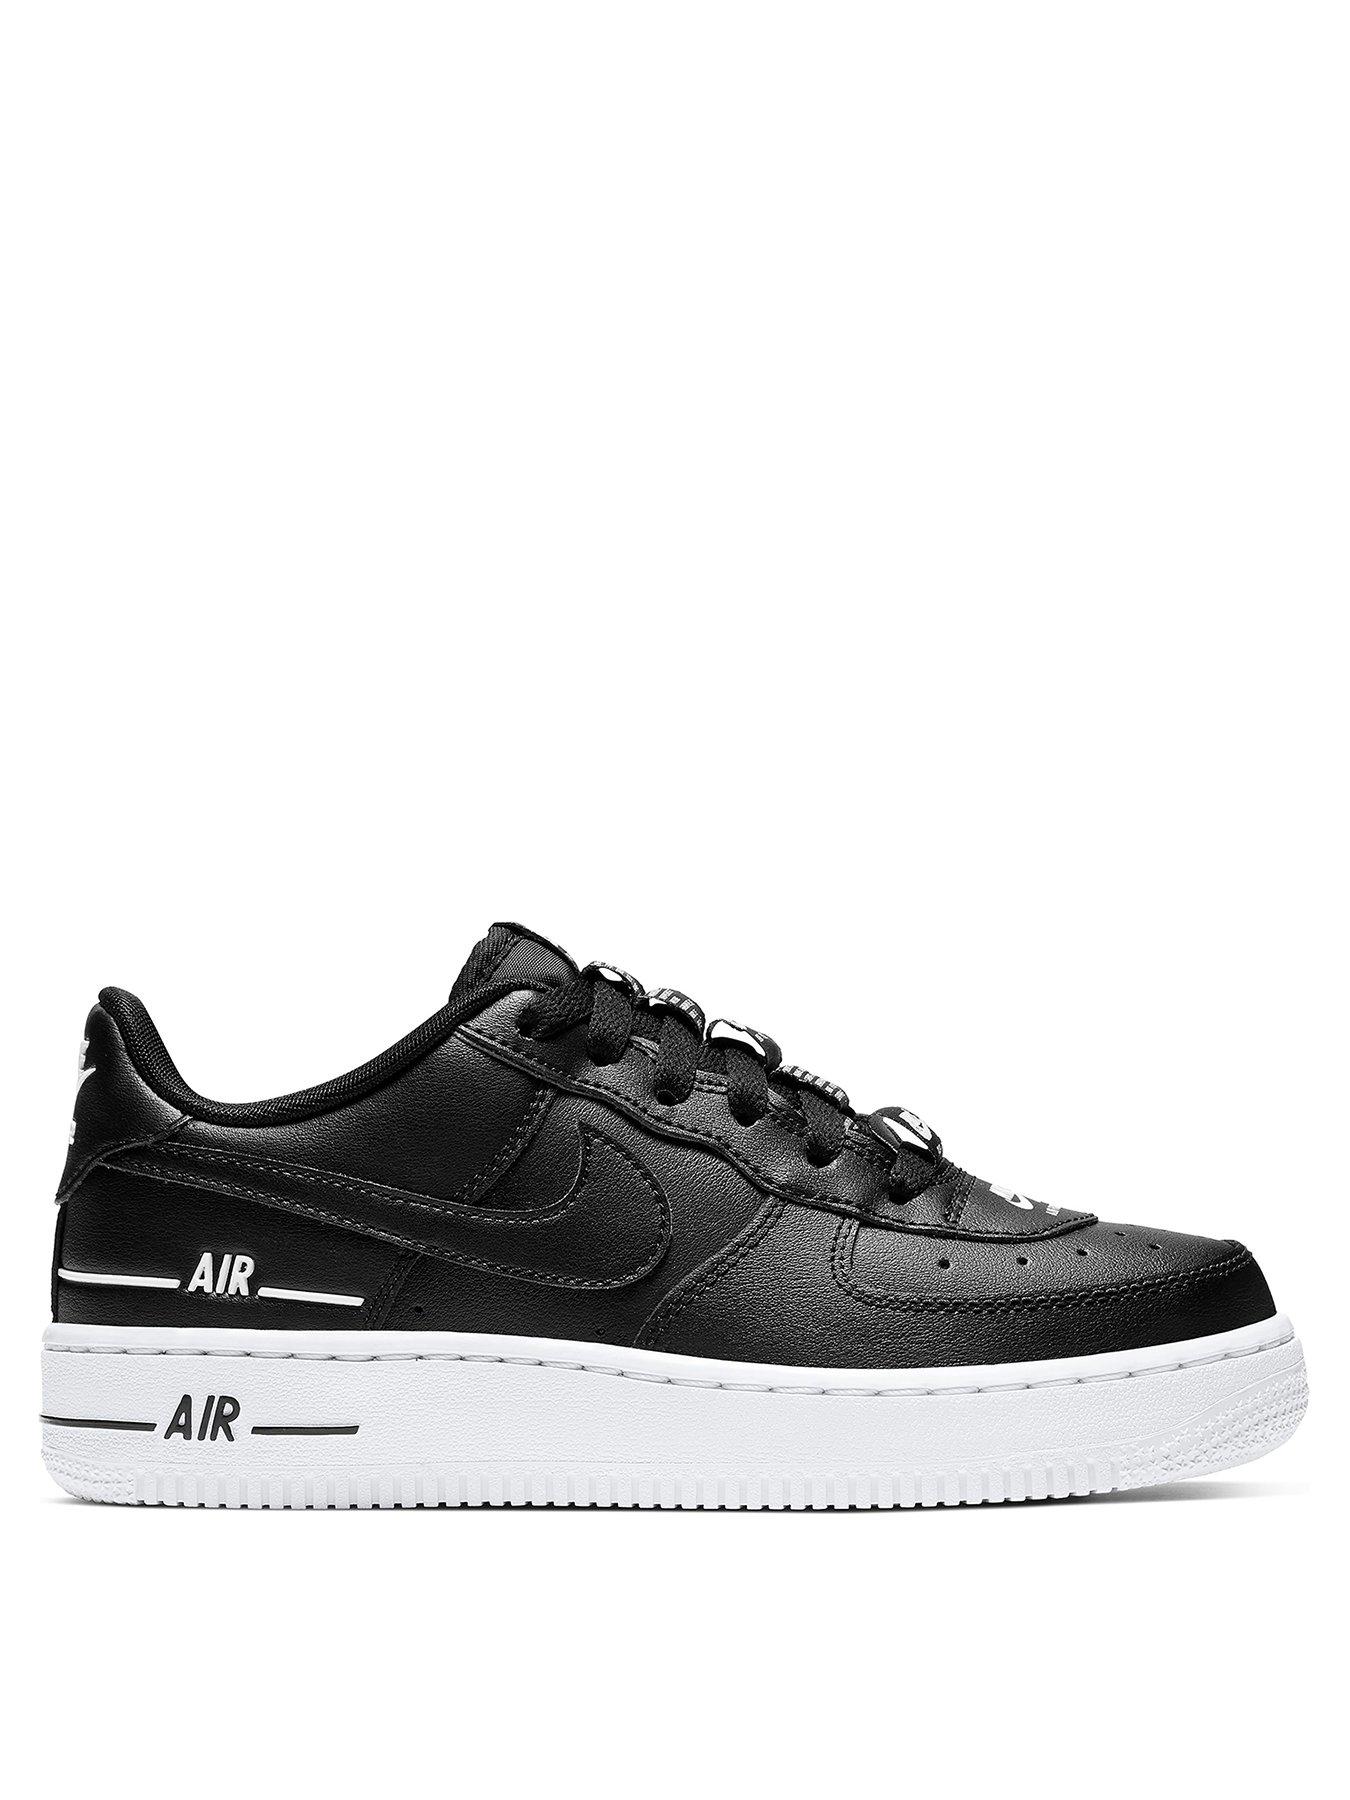 black and white junior air force 1